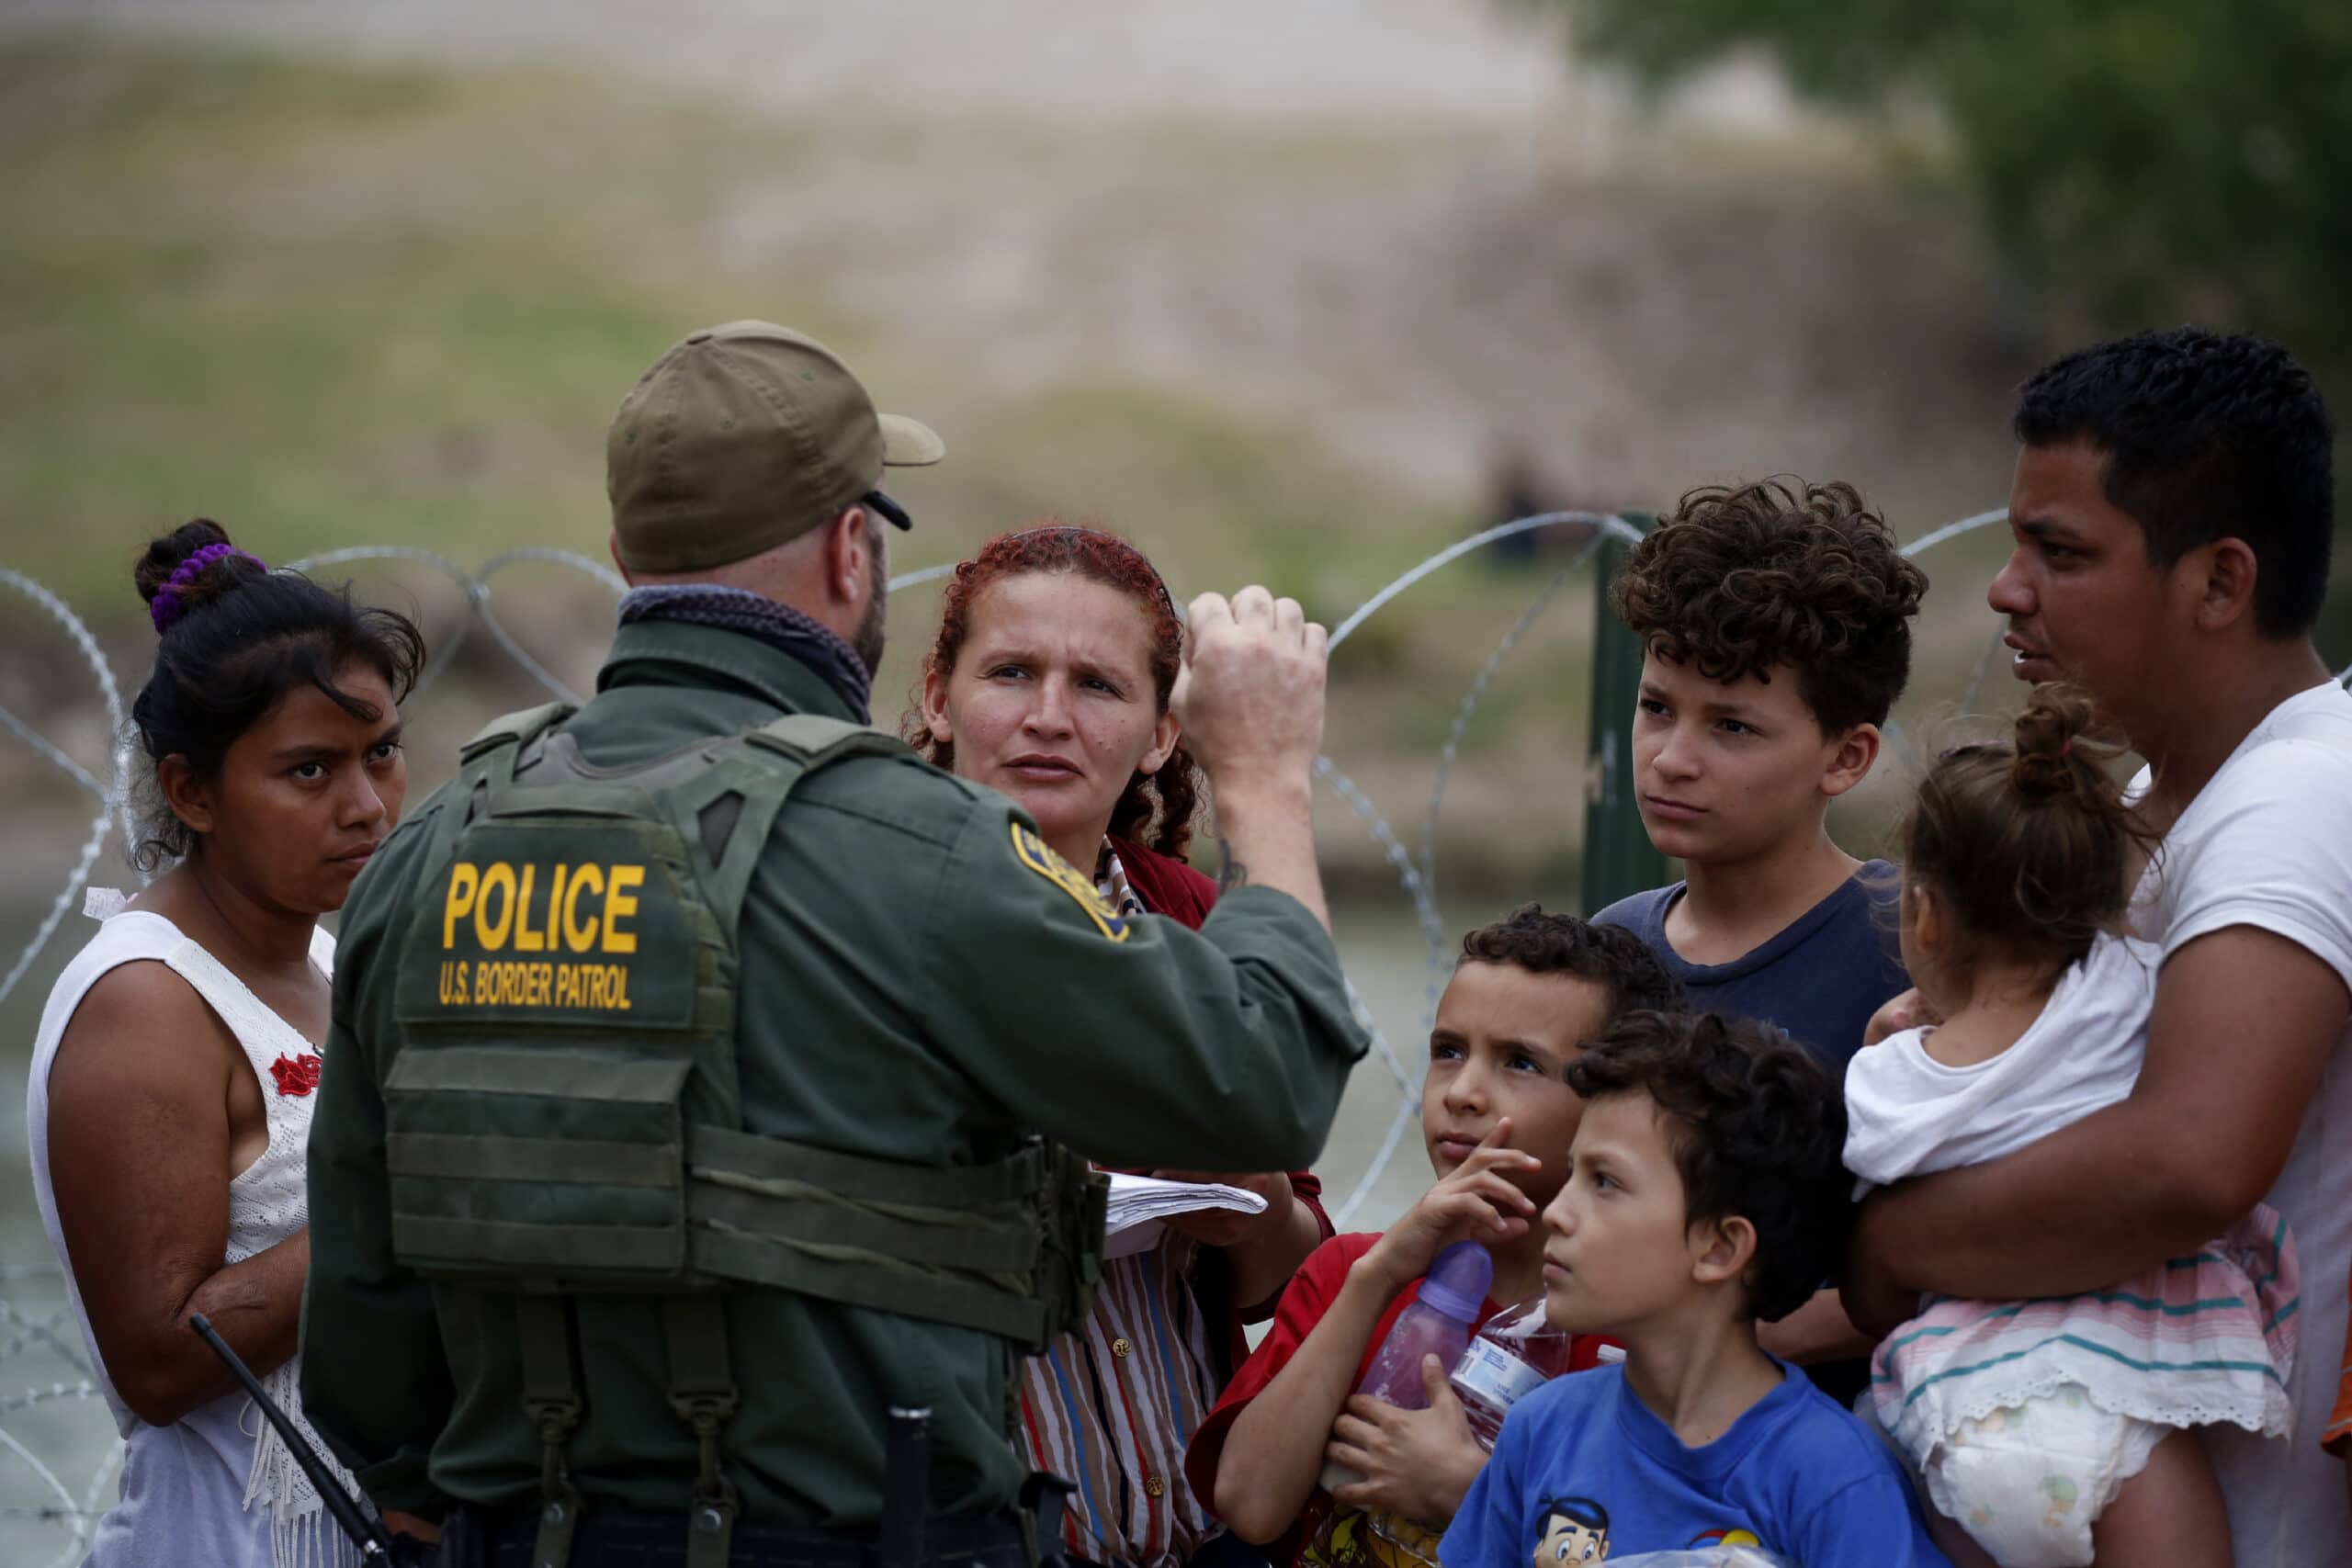 A Border Patrol officer talks to migrants after they crossed the Rio Grande river in Eagle Pass, Texas, Sunday May 22, 2022. The U.S. government has expelled migrants more than 1.9 million times under Title 42, named for a 1944 public health law, denying them a chance to seek asylum as permitted under U.S. law and international treaty for purposes of preventing the spread of COVID-19. President Joe Biden wanted to end Title 42, but a federal judge in Louisiana issued a nationwide injunction that keeps it intact.  (AP Photo/Dario Lopez-Mills)